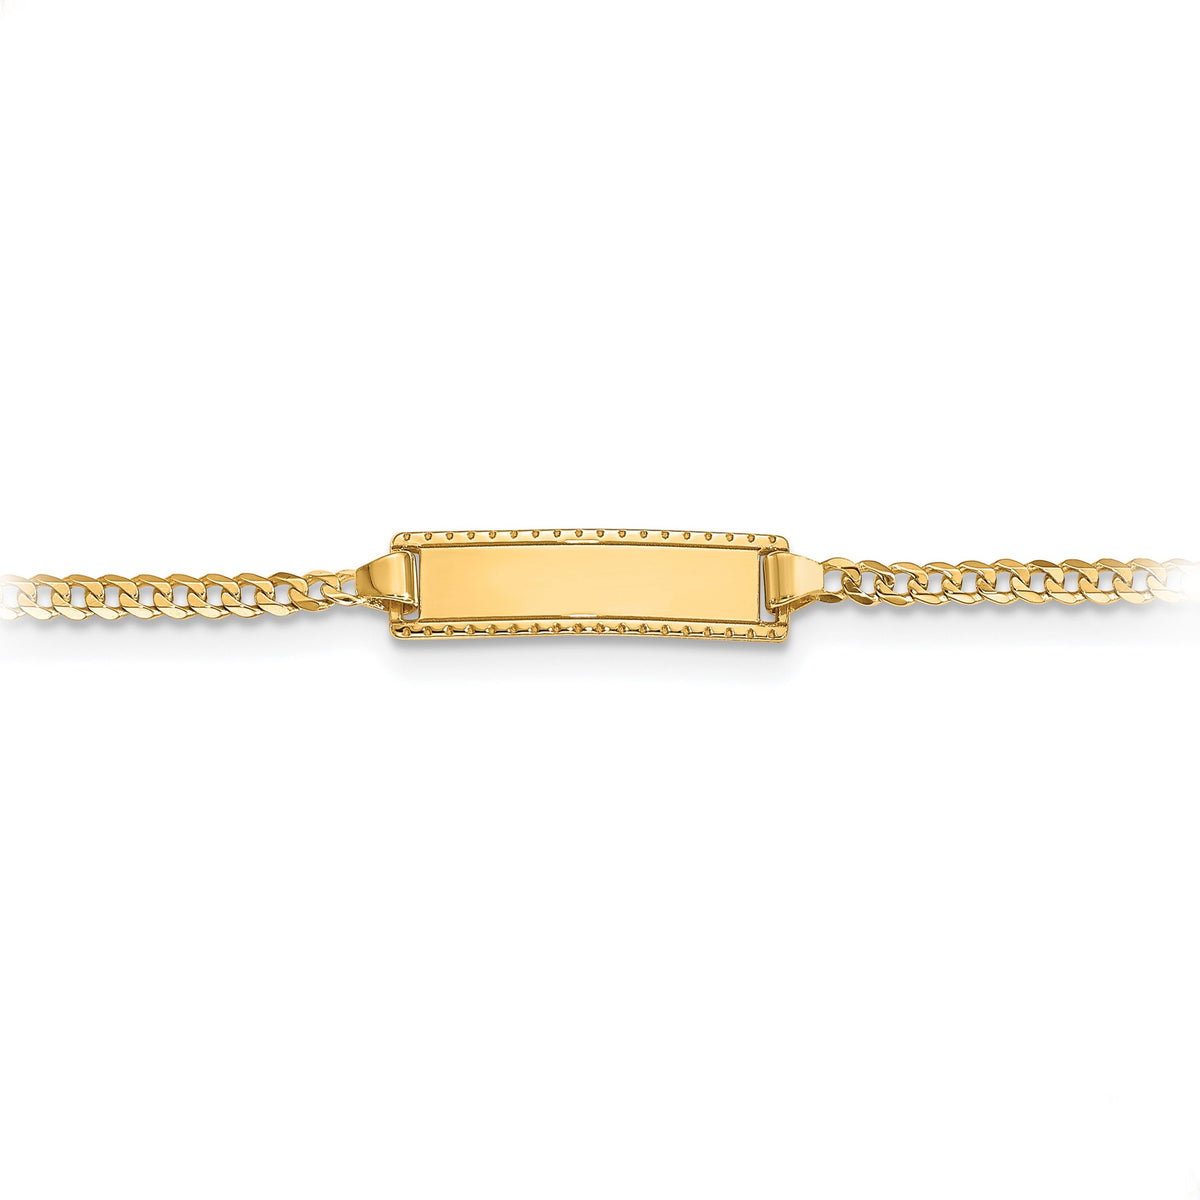 Baby to Toddler 10k Yellow Gold Personalized ID Curb Bracelet - 6 inches  Front & Back with Engraving ( 8 Characters) Baby-Toddler Size 5mm